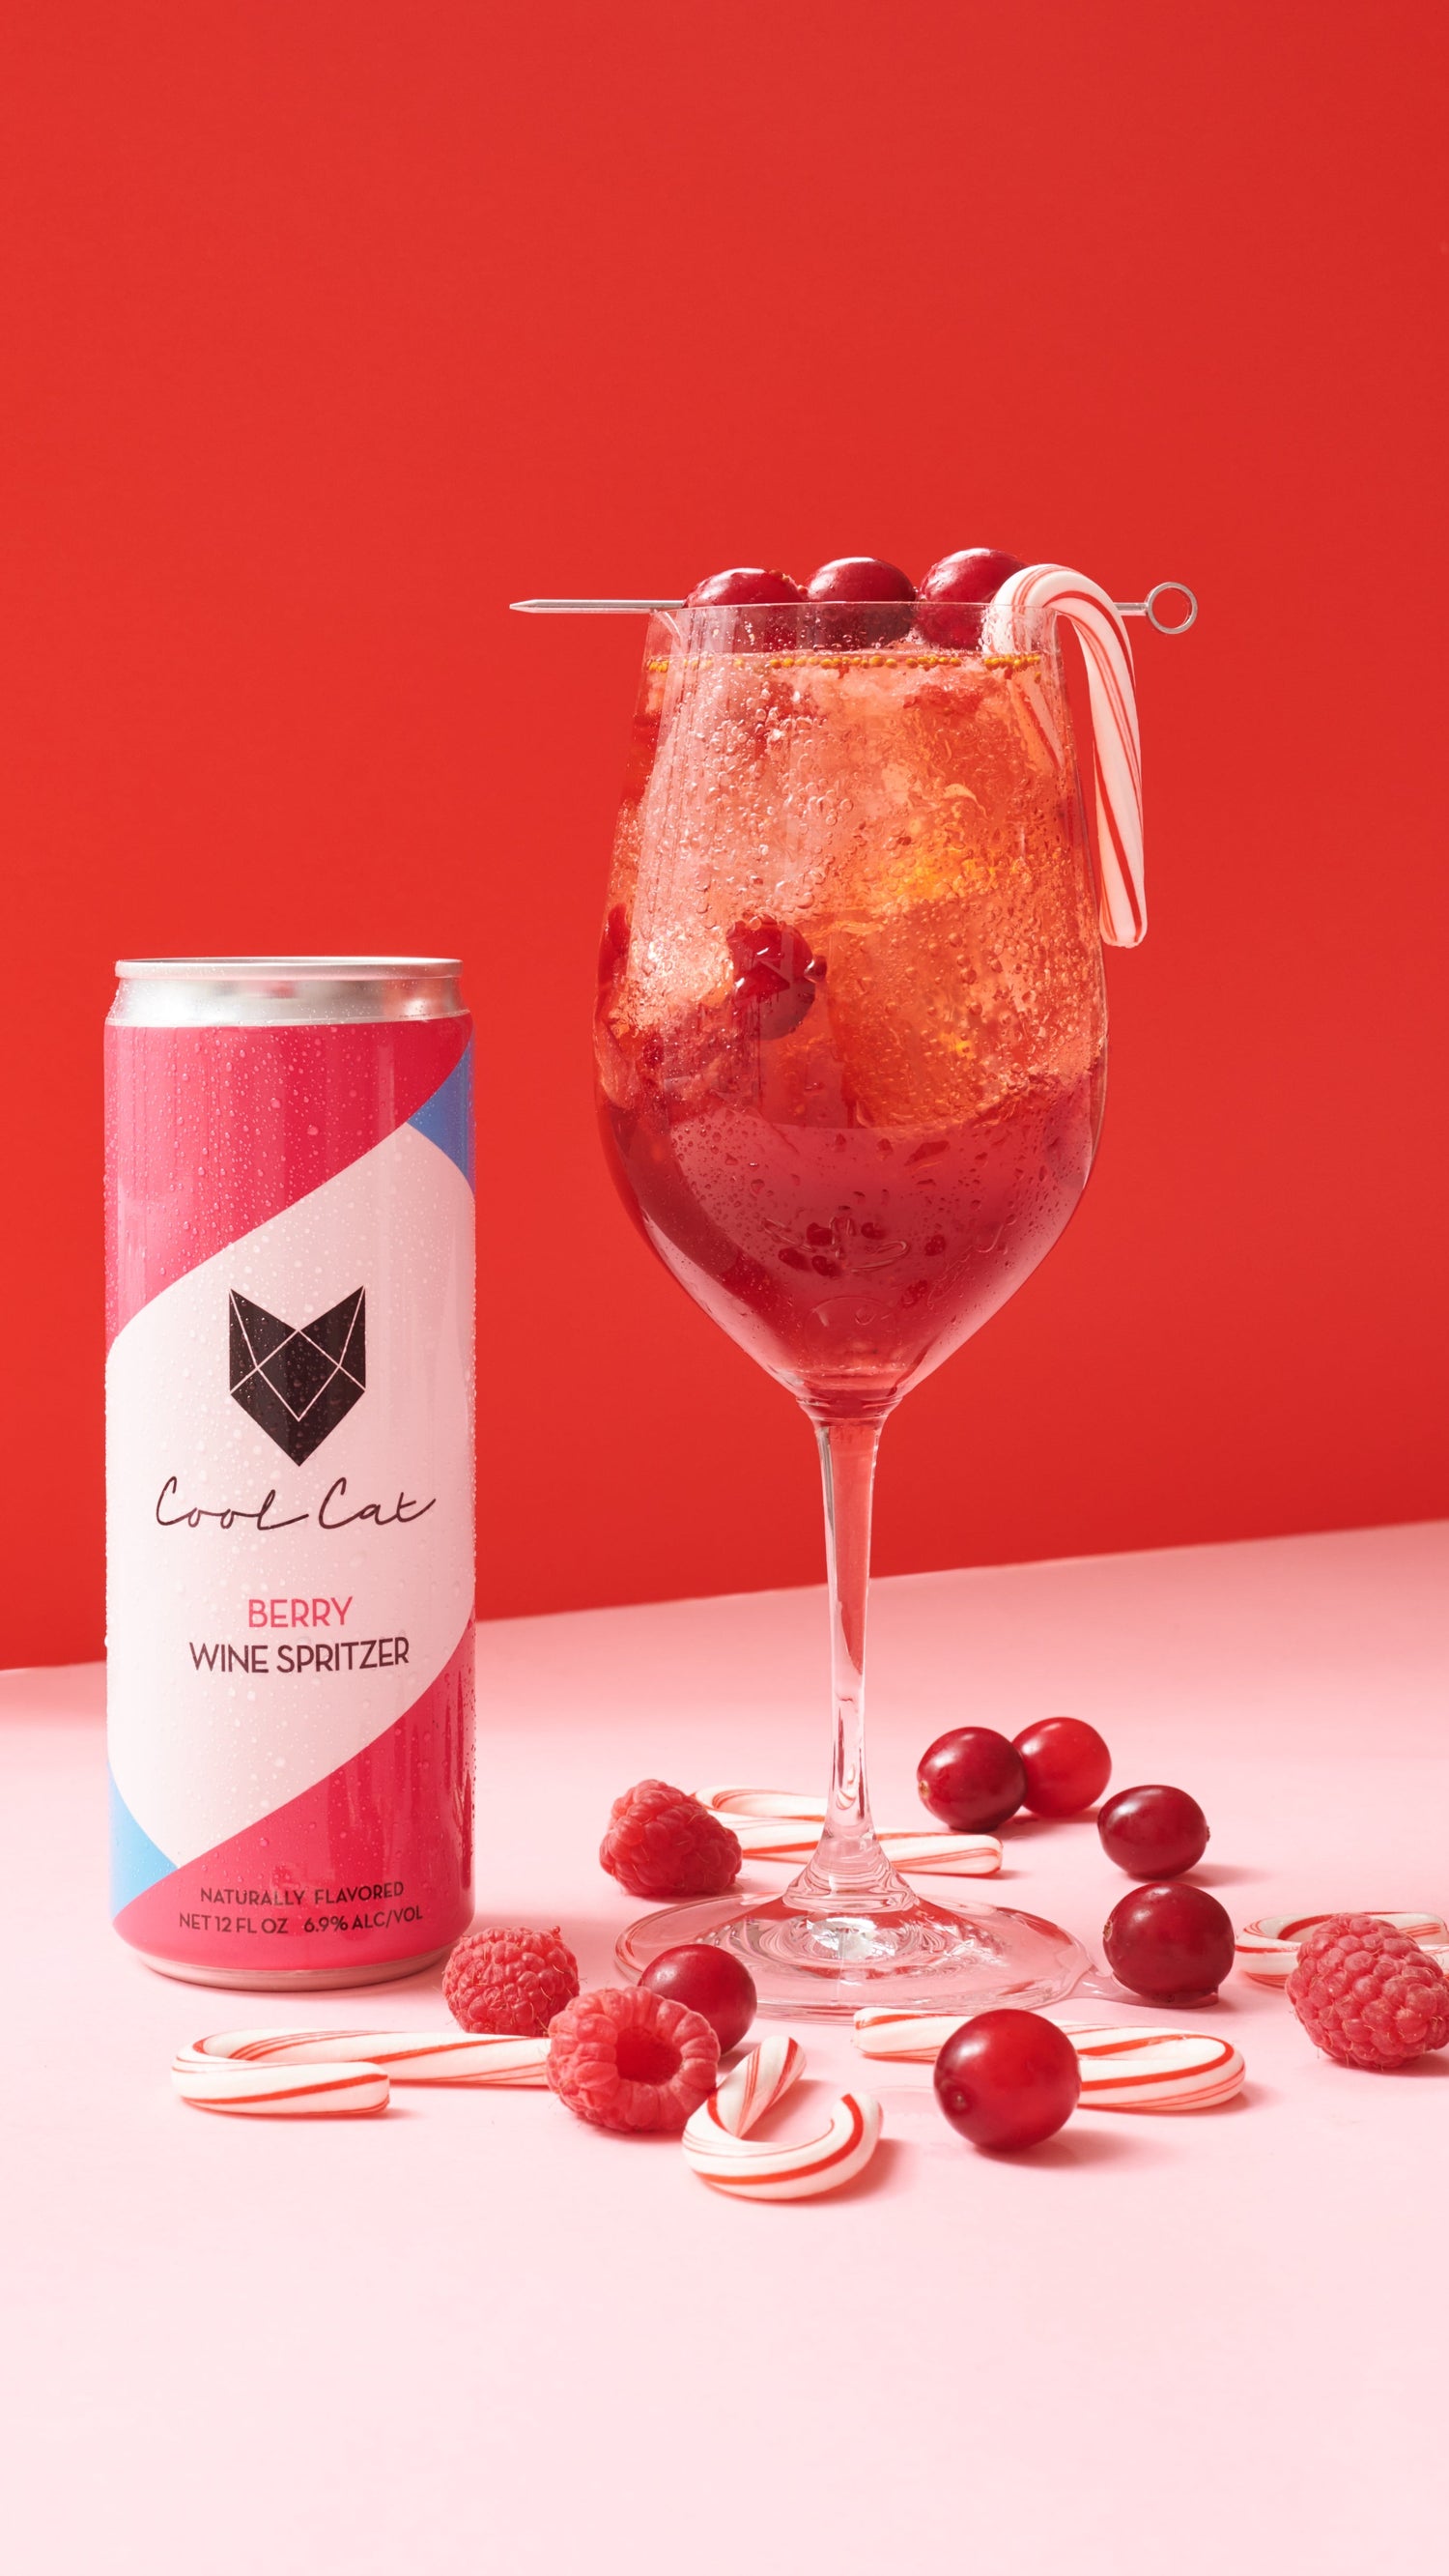 The Merry Berry holiday cocktail next to a can of Cool Cat Berry Wine Spritzer.